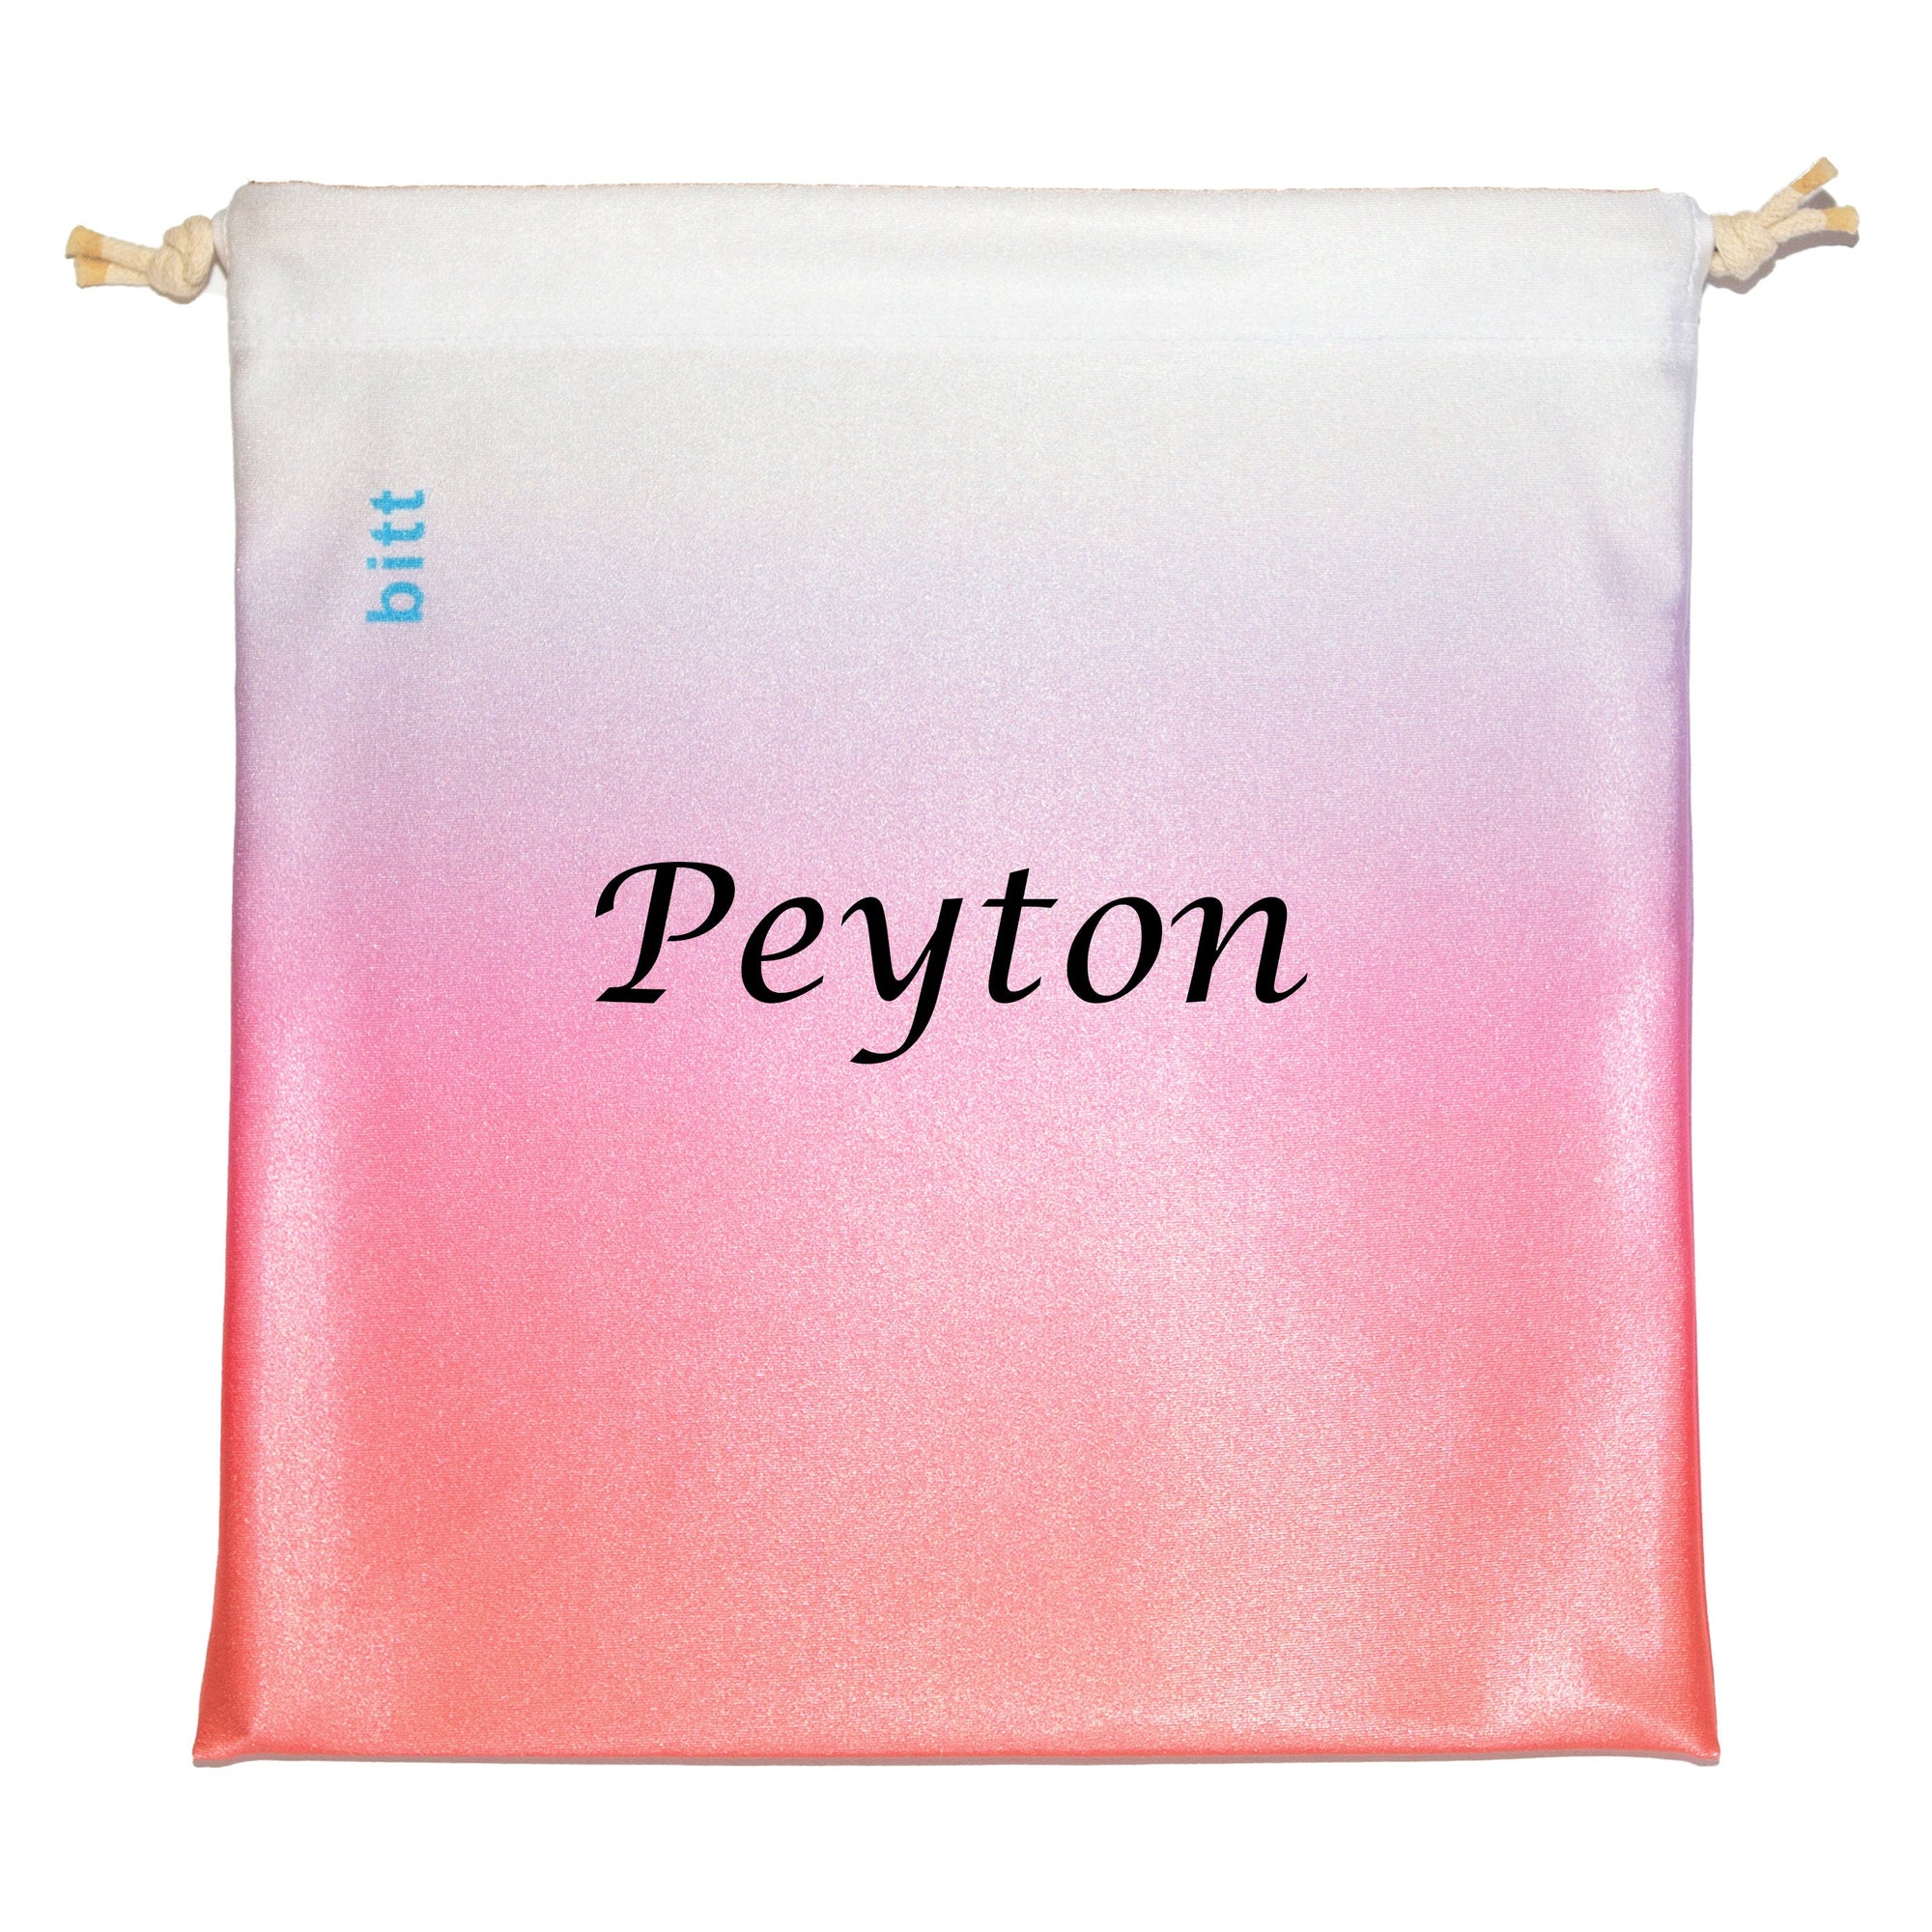 Personlized Gymnastics Grip Bag in Coral, Purple, White Ombre